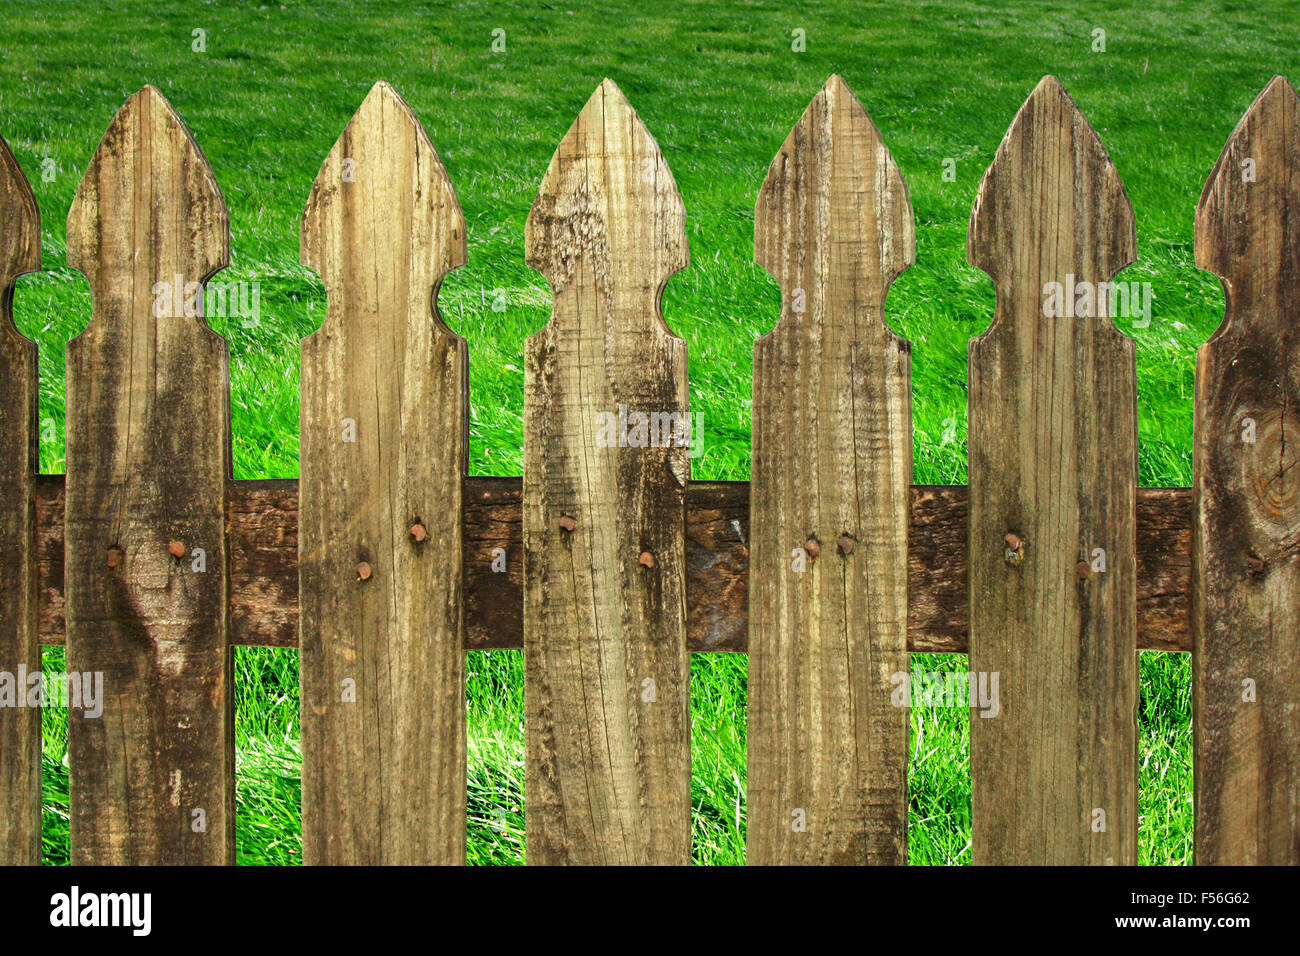 a field of lush green grass with a old wooden fence in foreground Stock Photo